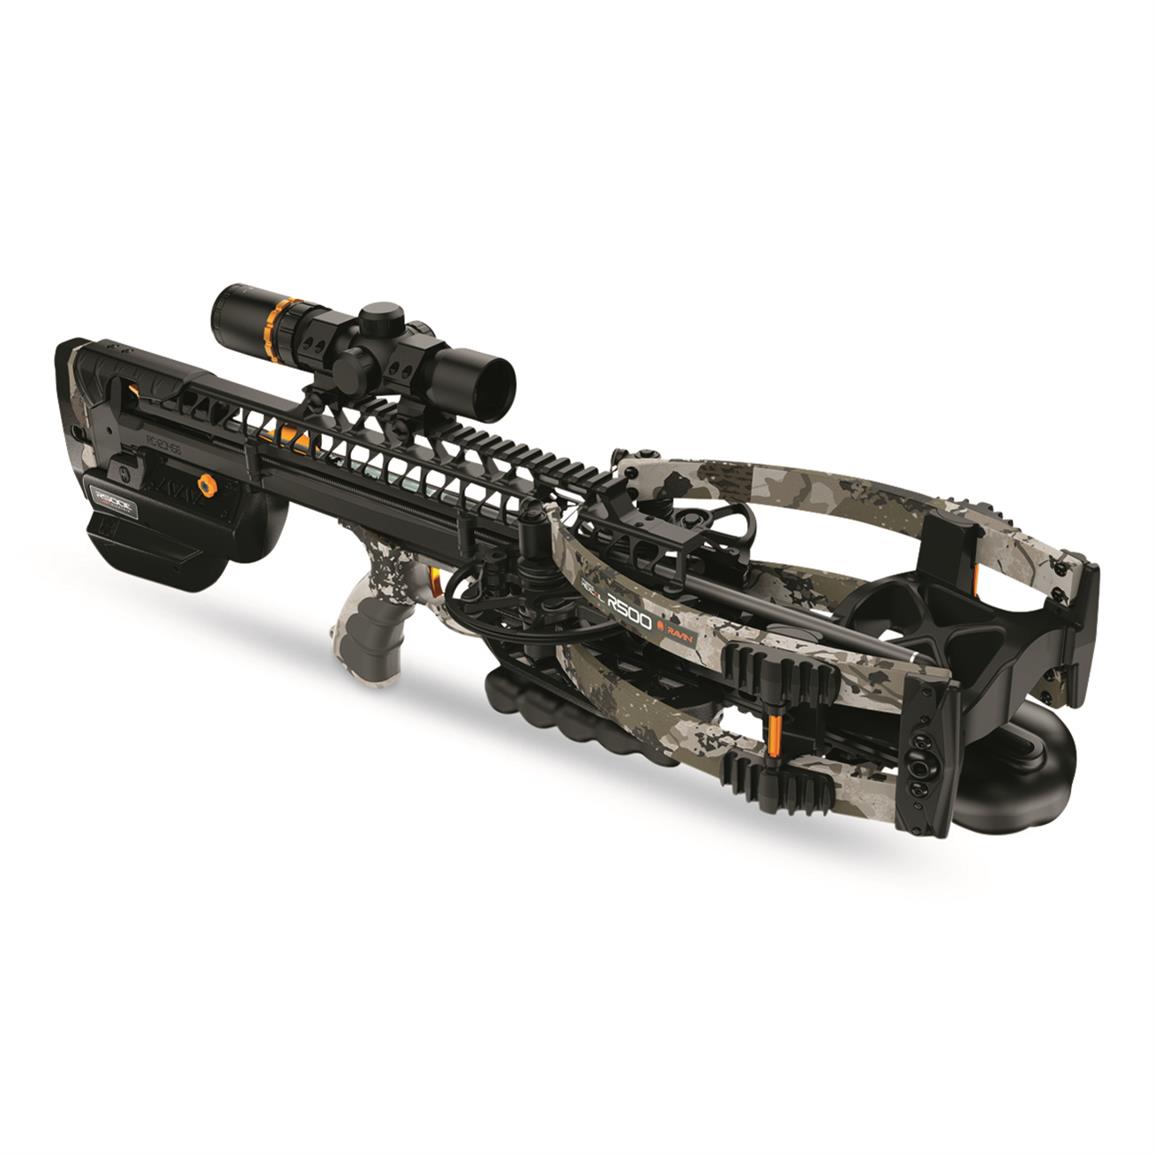 Ravin R500E Crossbow Package, King's XK7 Camo